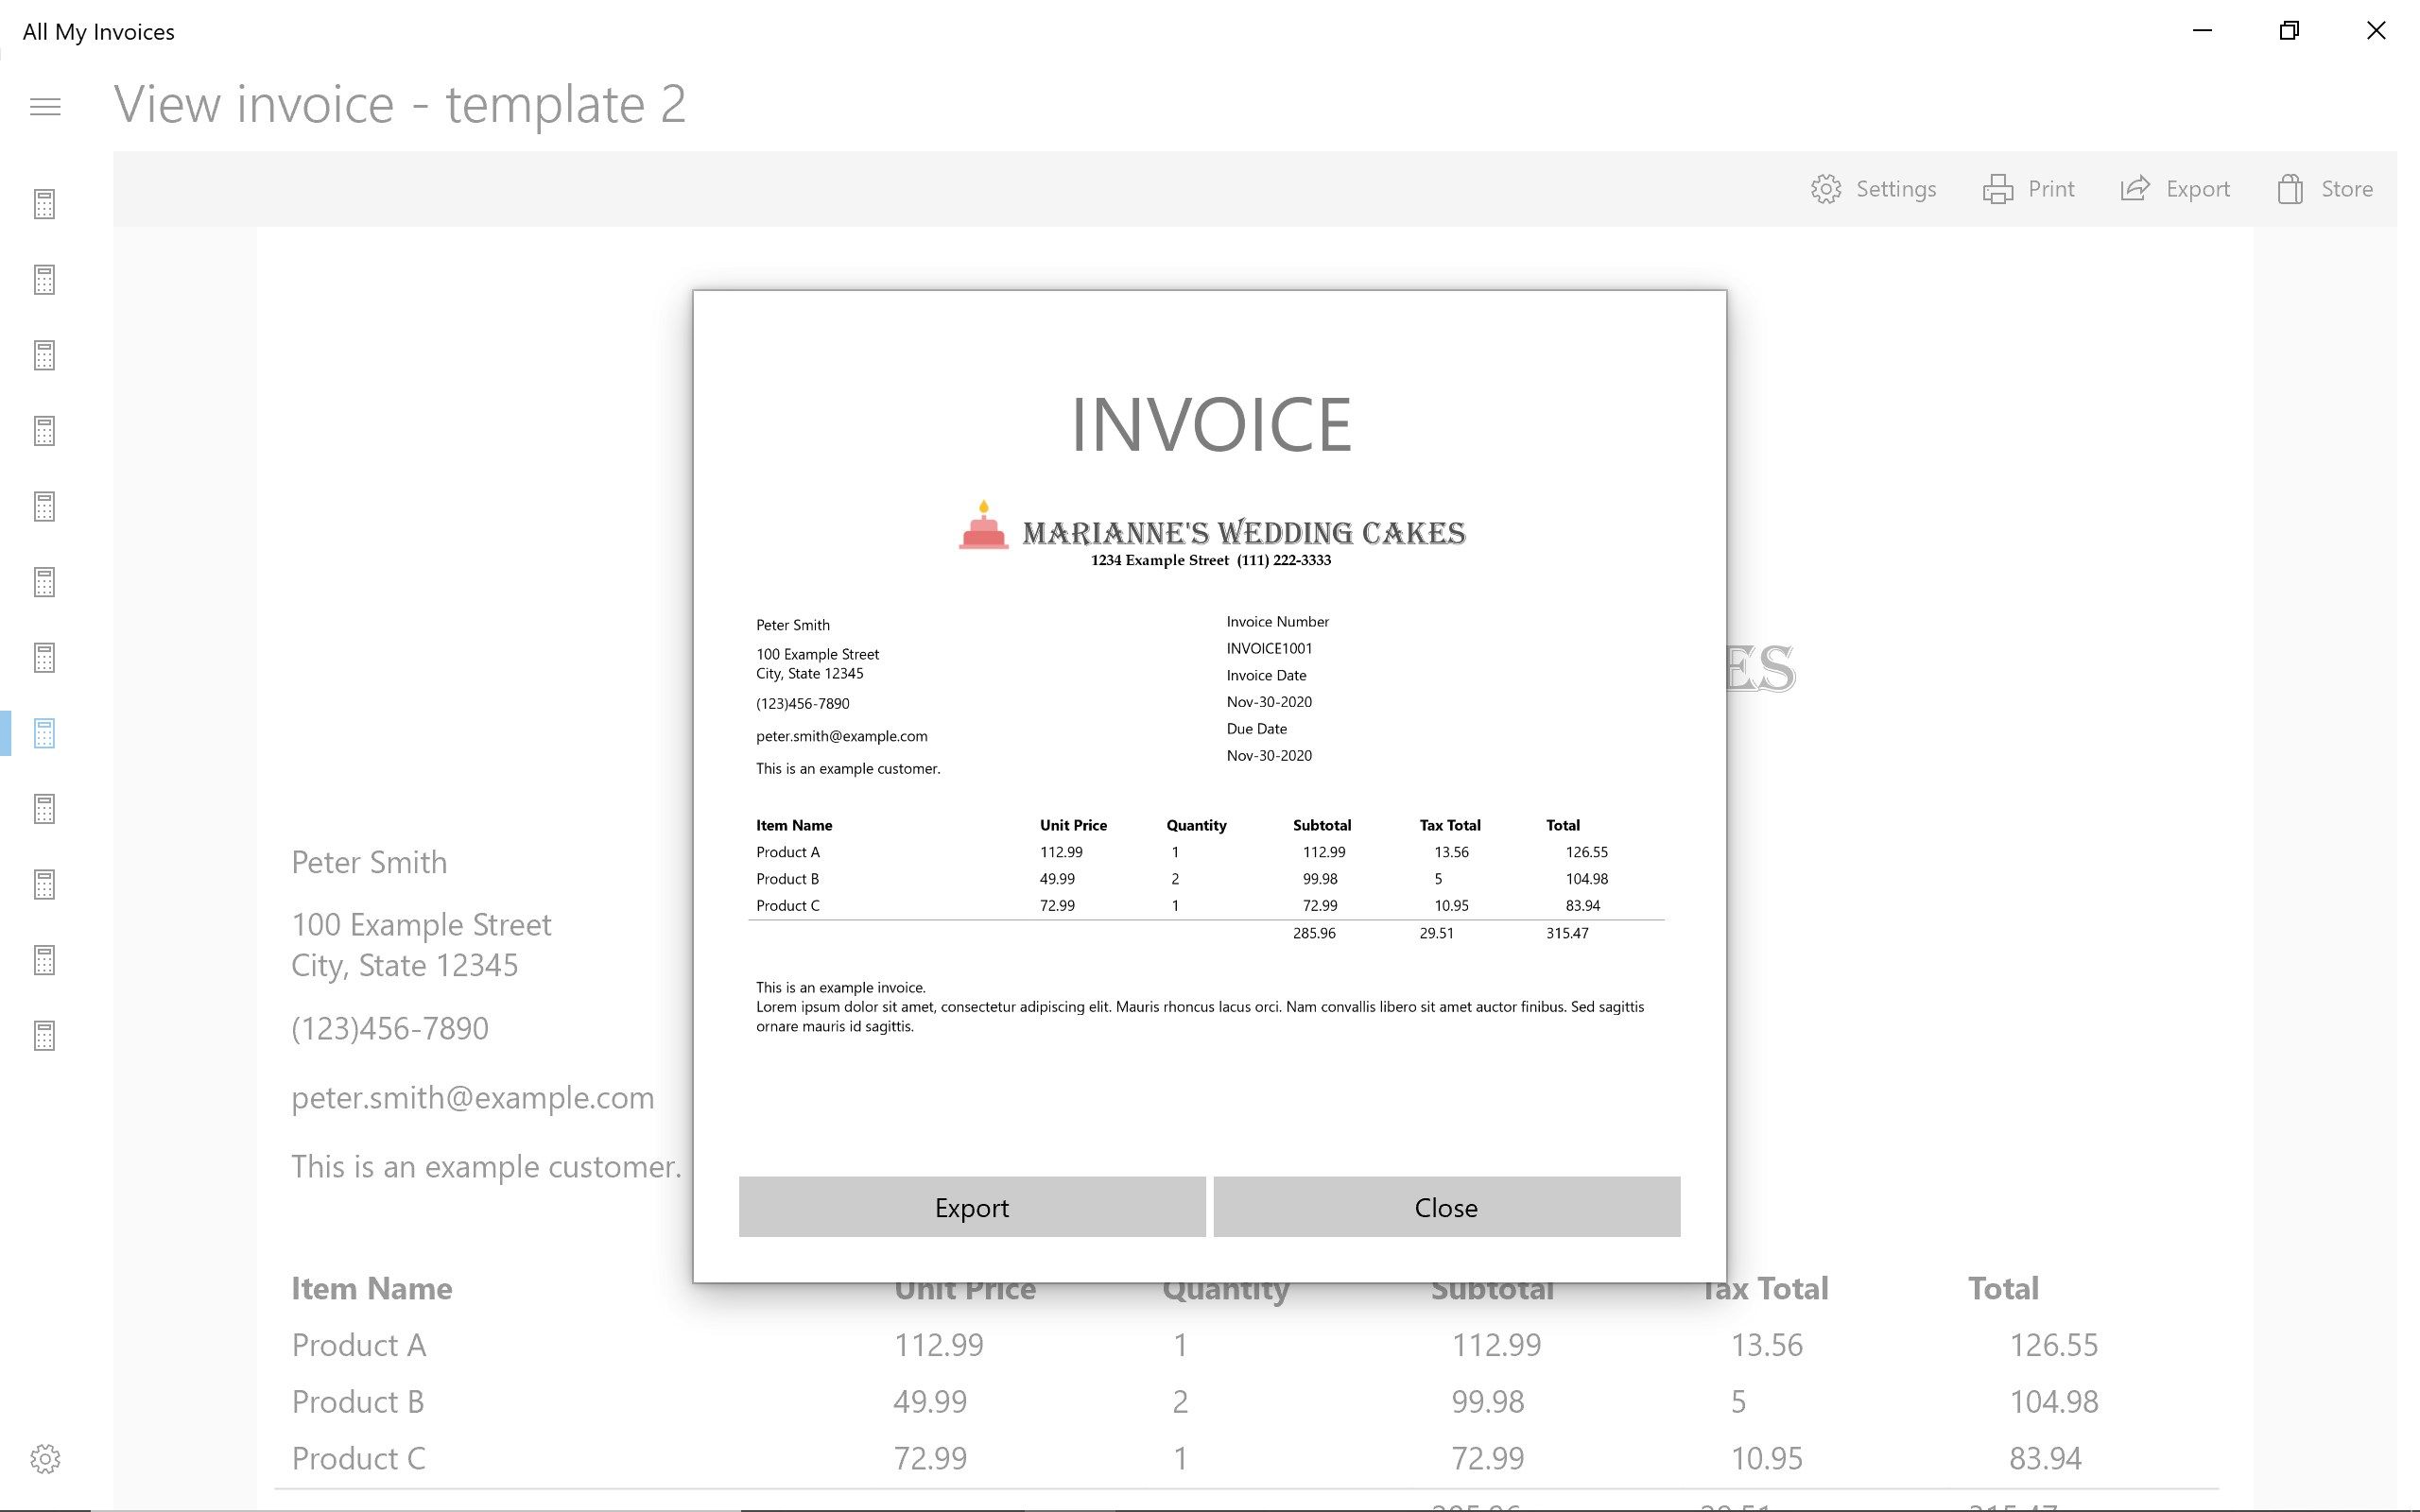 All My Invoices - Invoice Maker